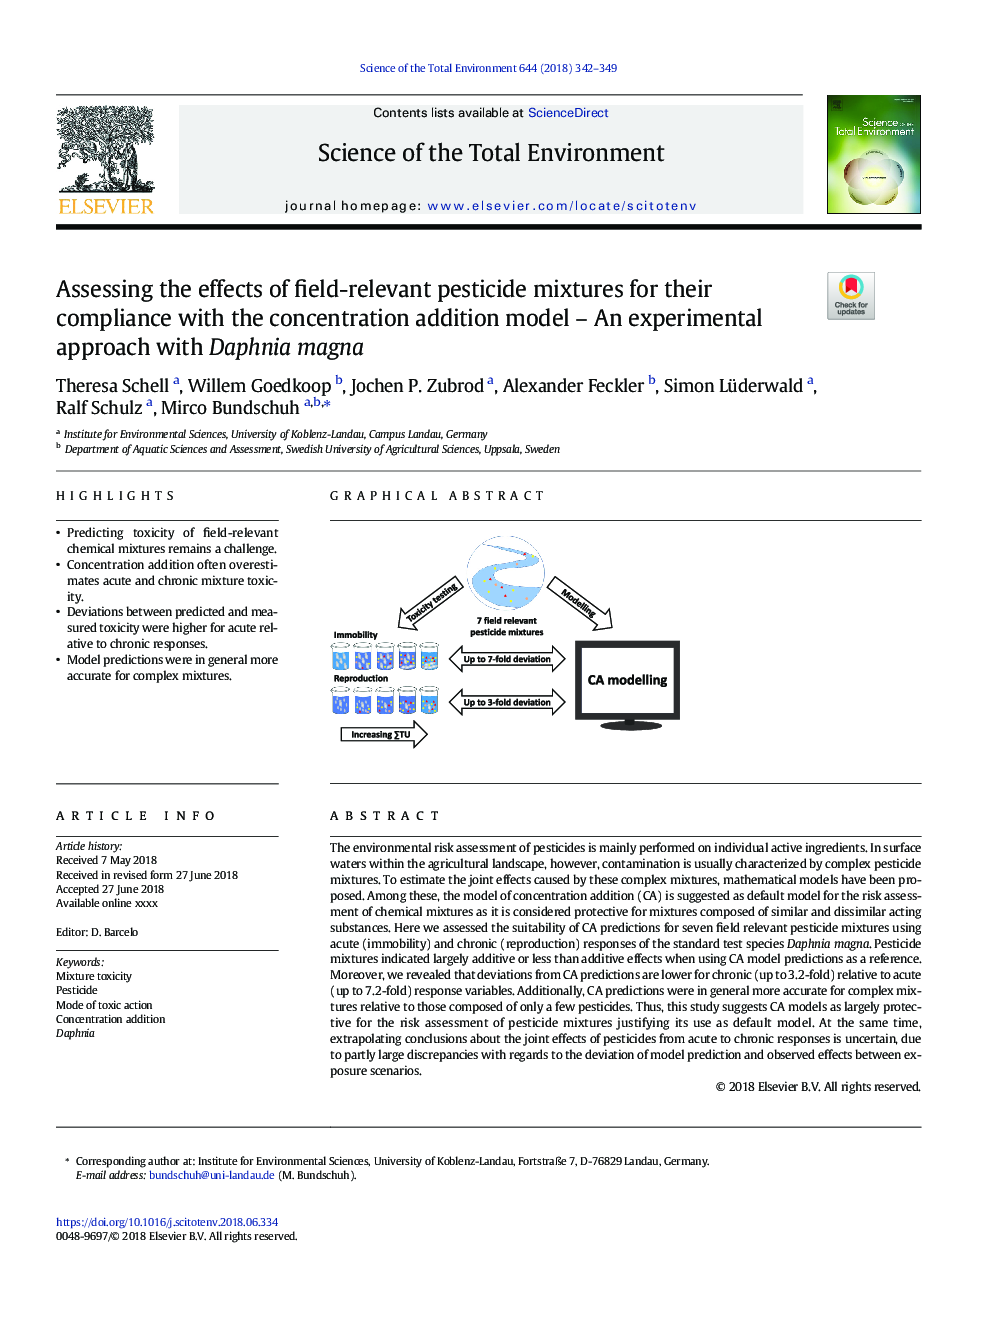 Assessing the effects of field-relevant pesticide mixtures for their compliance with the concentration addition model - An experimental approach with Daphnia magna